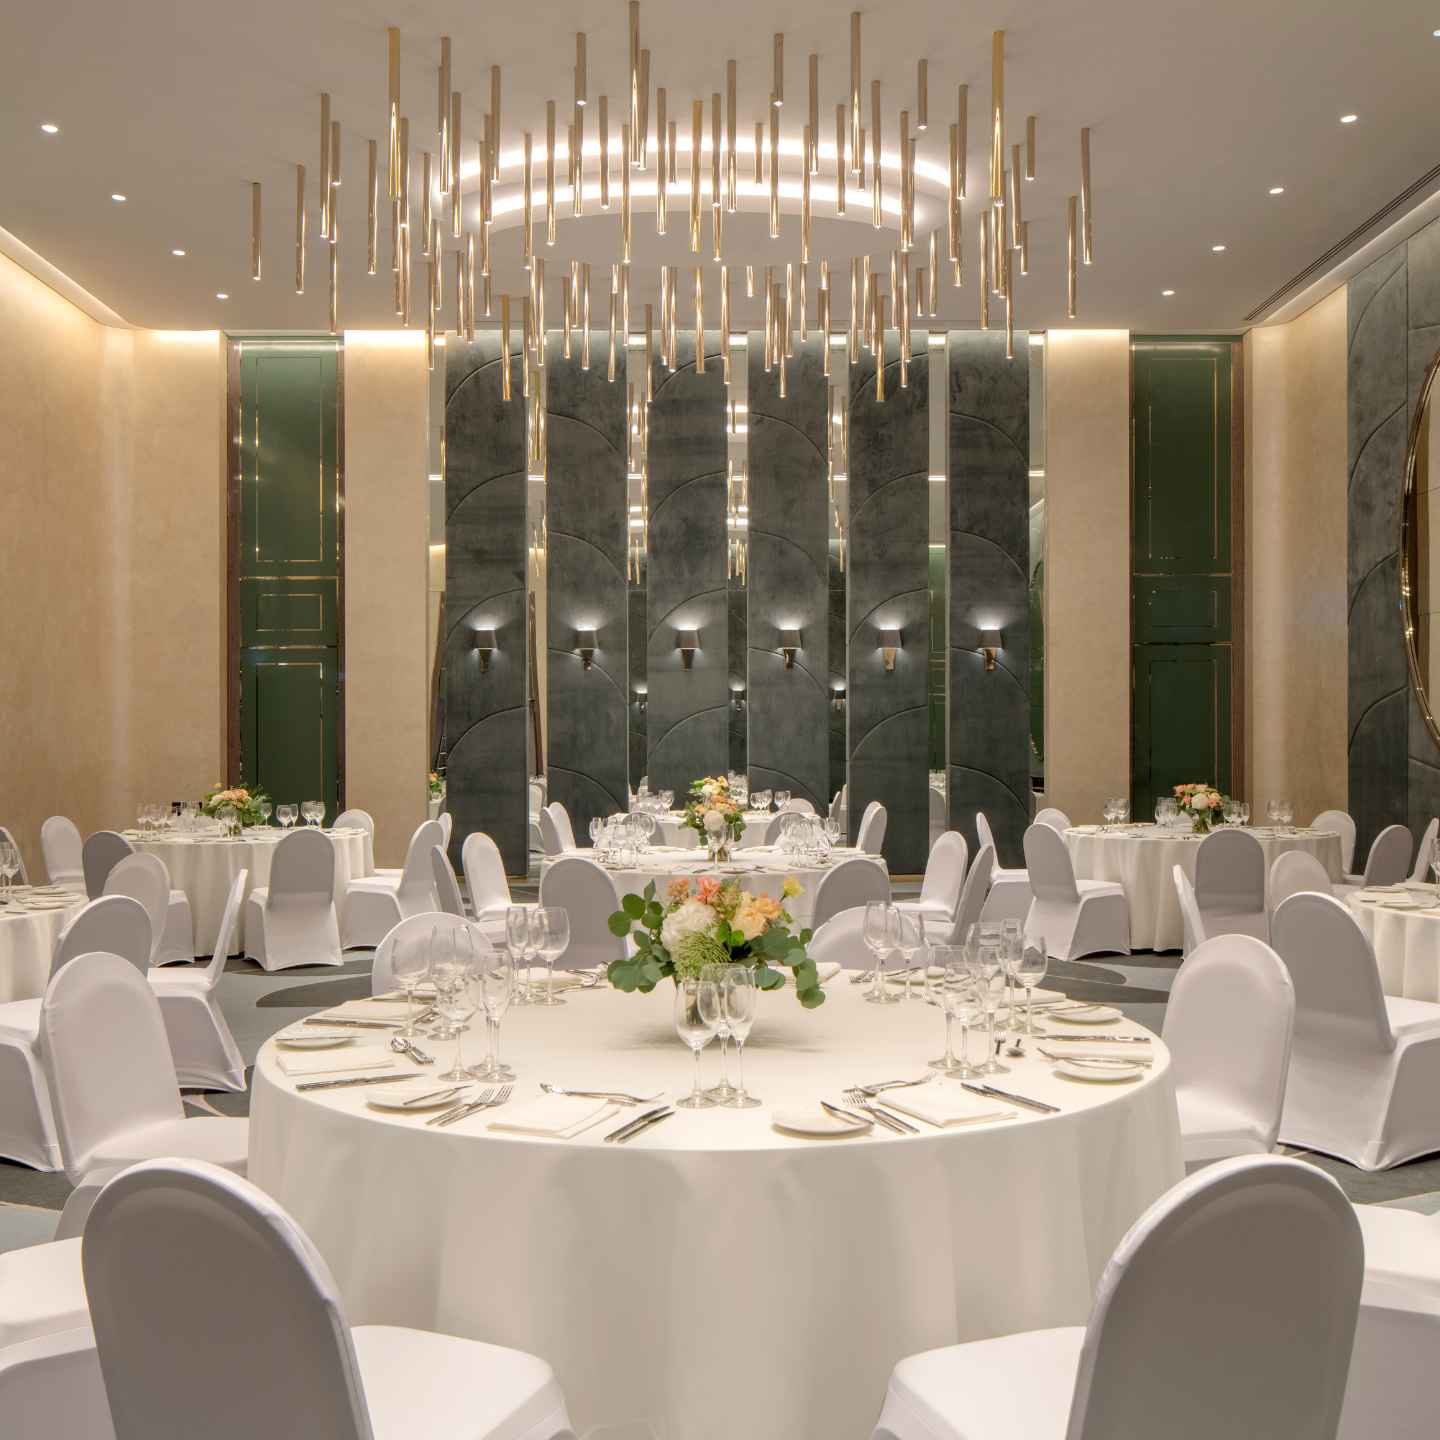 White round tables with white covered chairs in brightly lit ballroom with golden chandelier